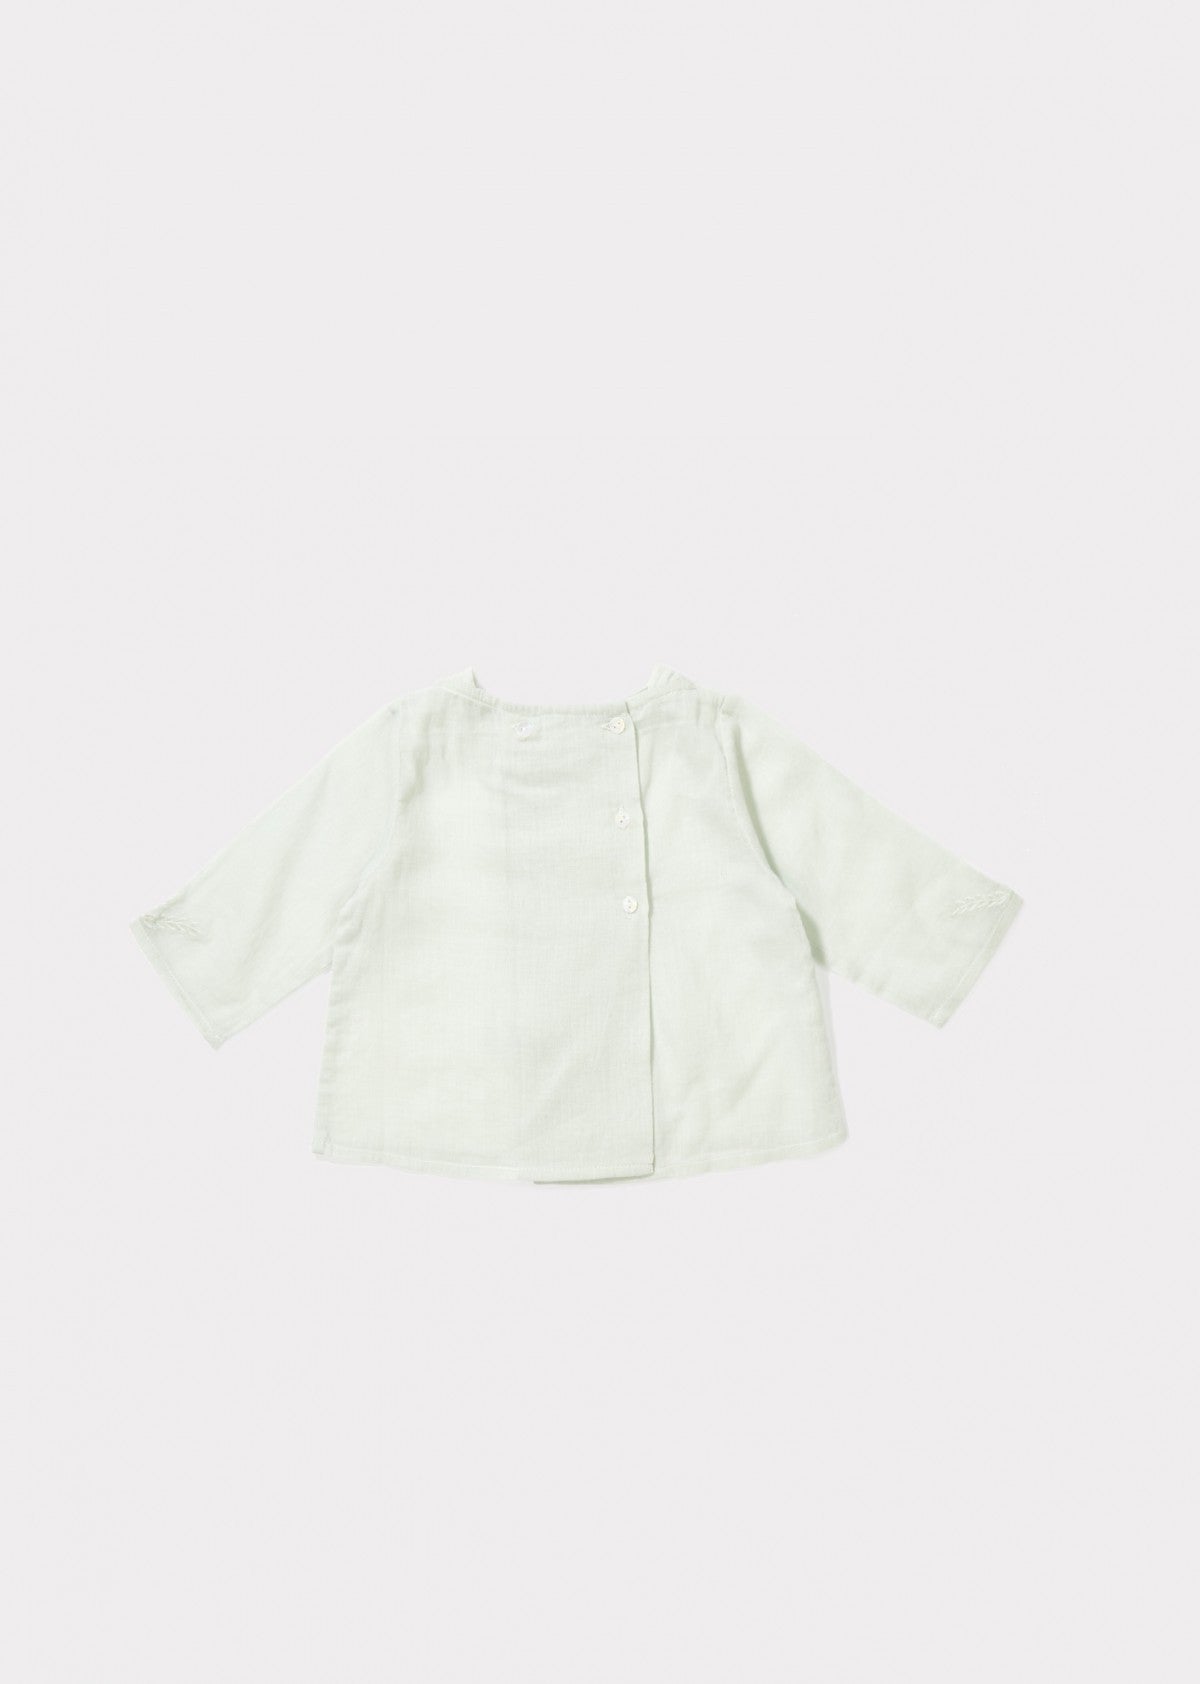 Baby Girls 'Althorp' Woven Top